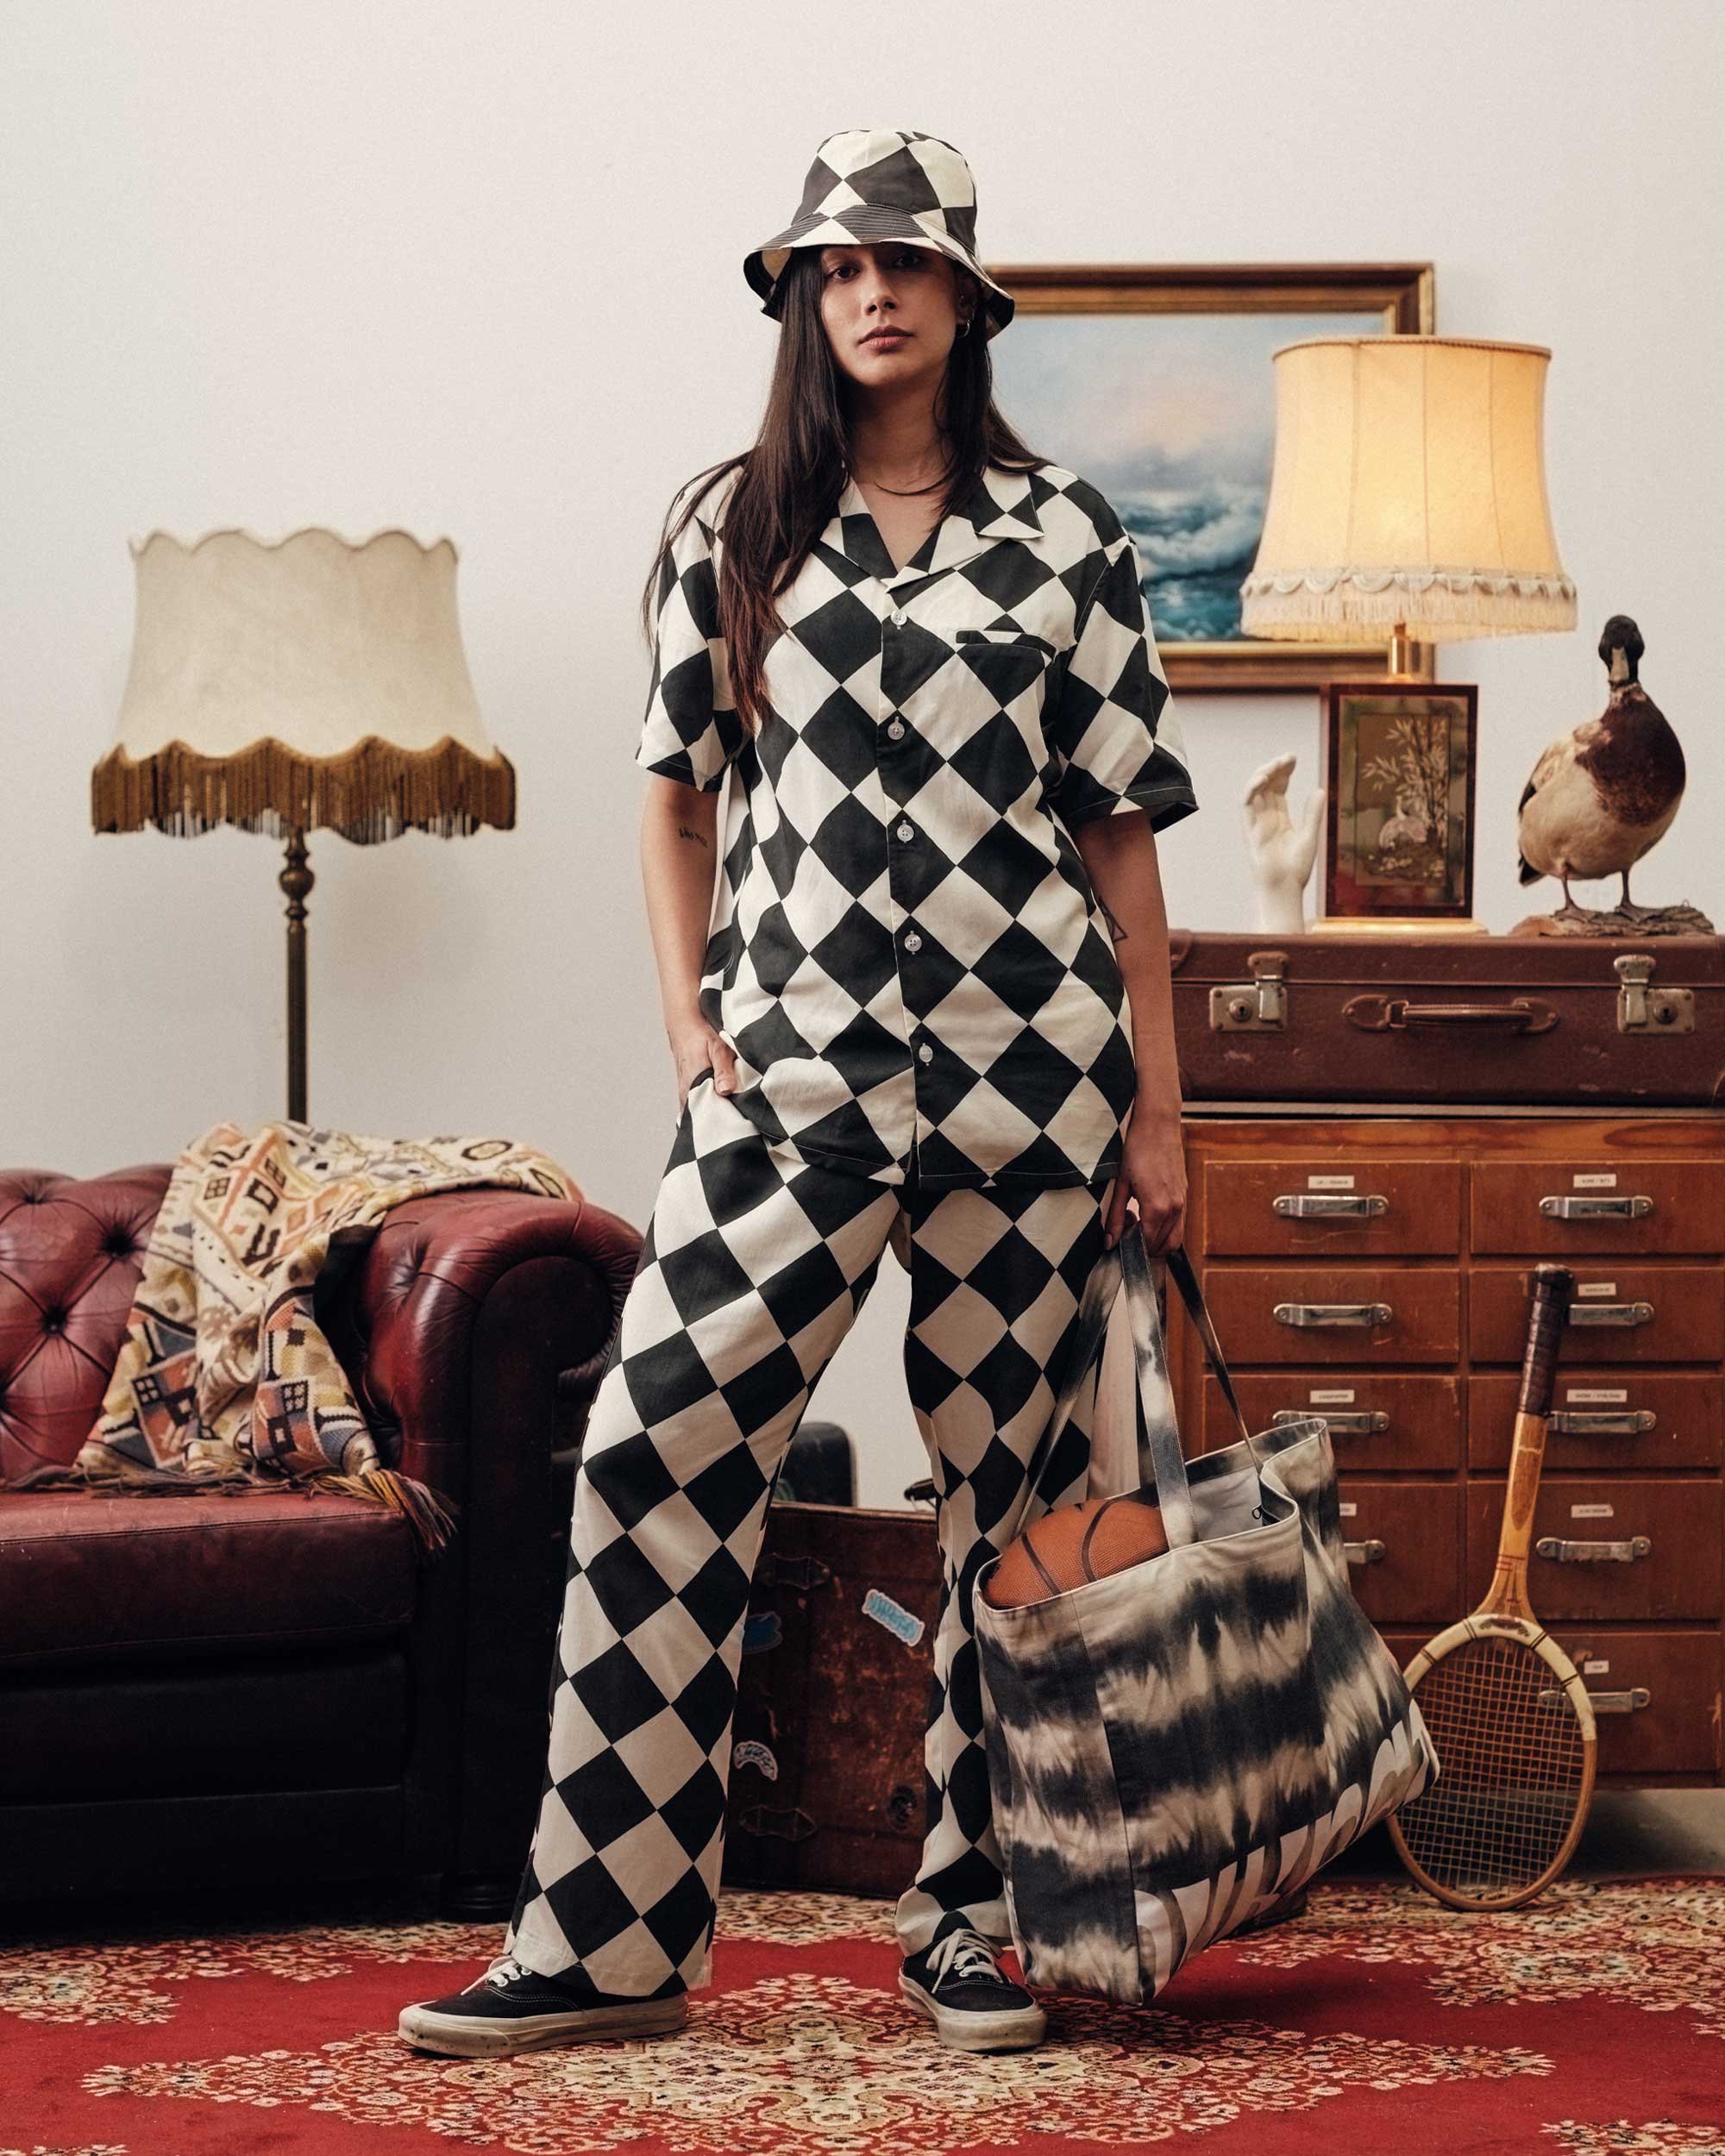 Female model wearing vacation pants with black and white checkered pattern.